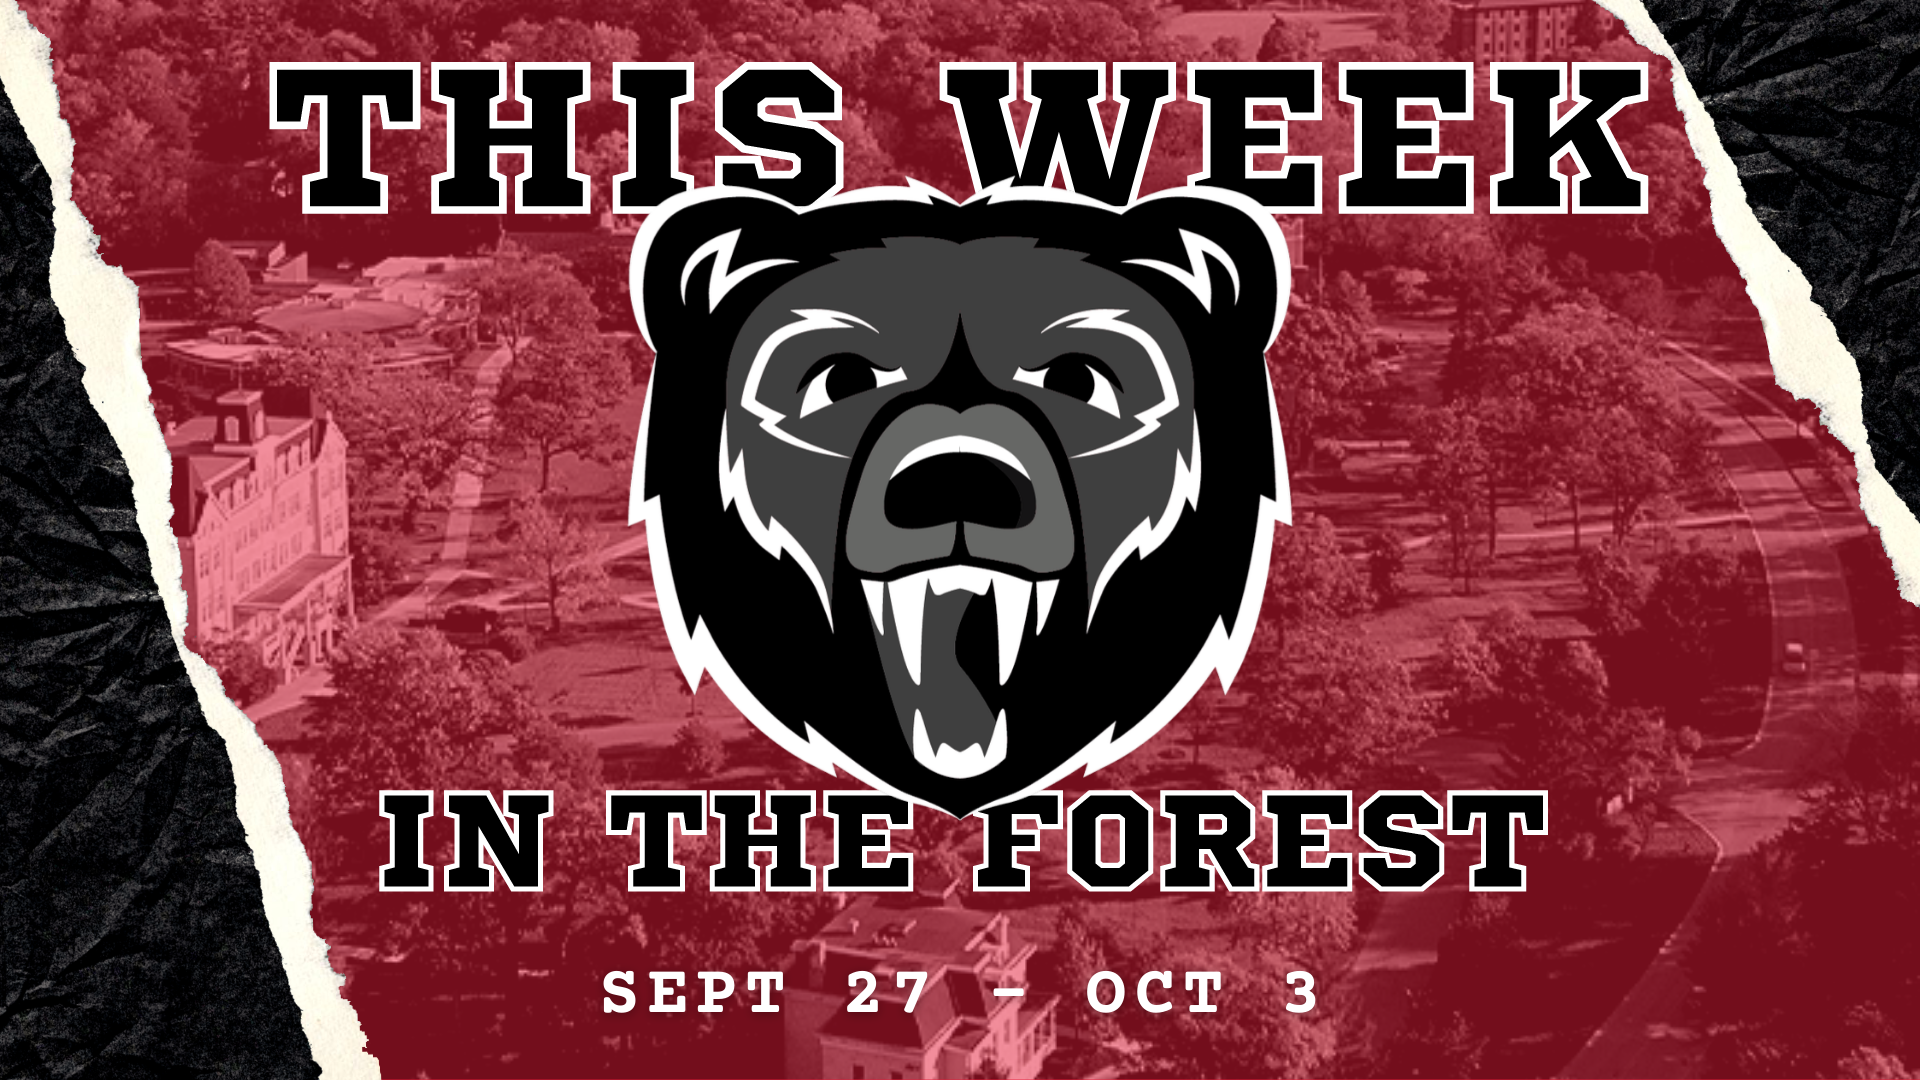 This Week in the Forest: Sept. 27-Oct. 3